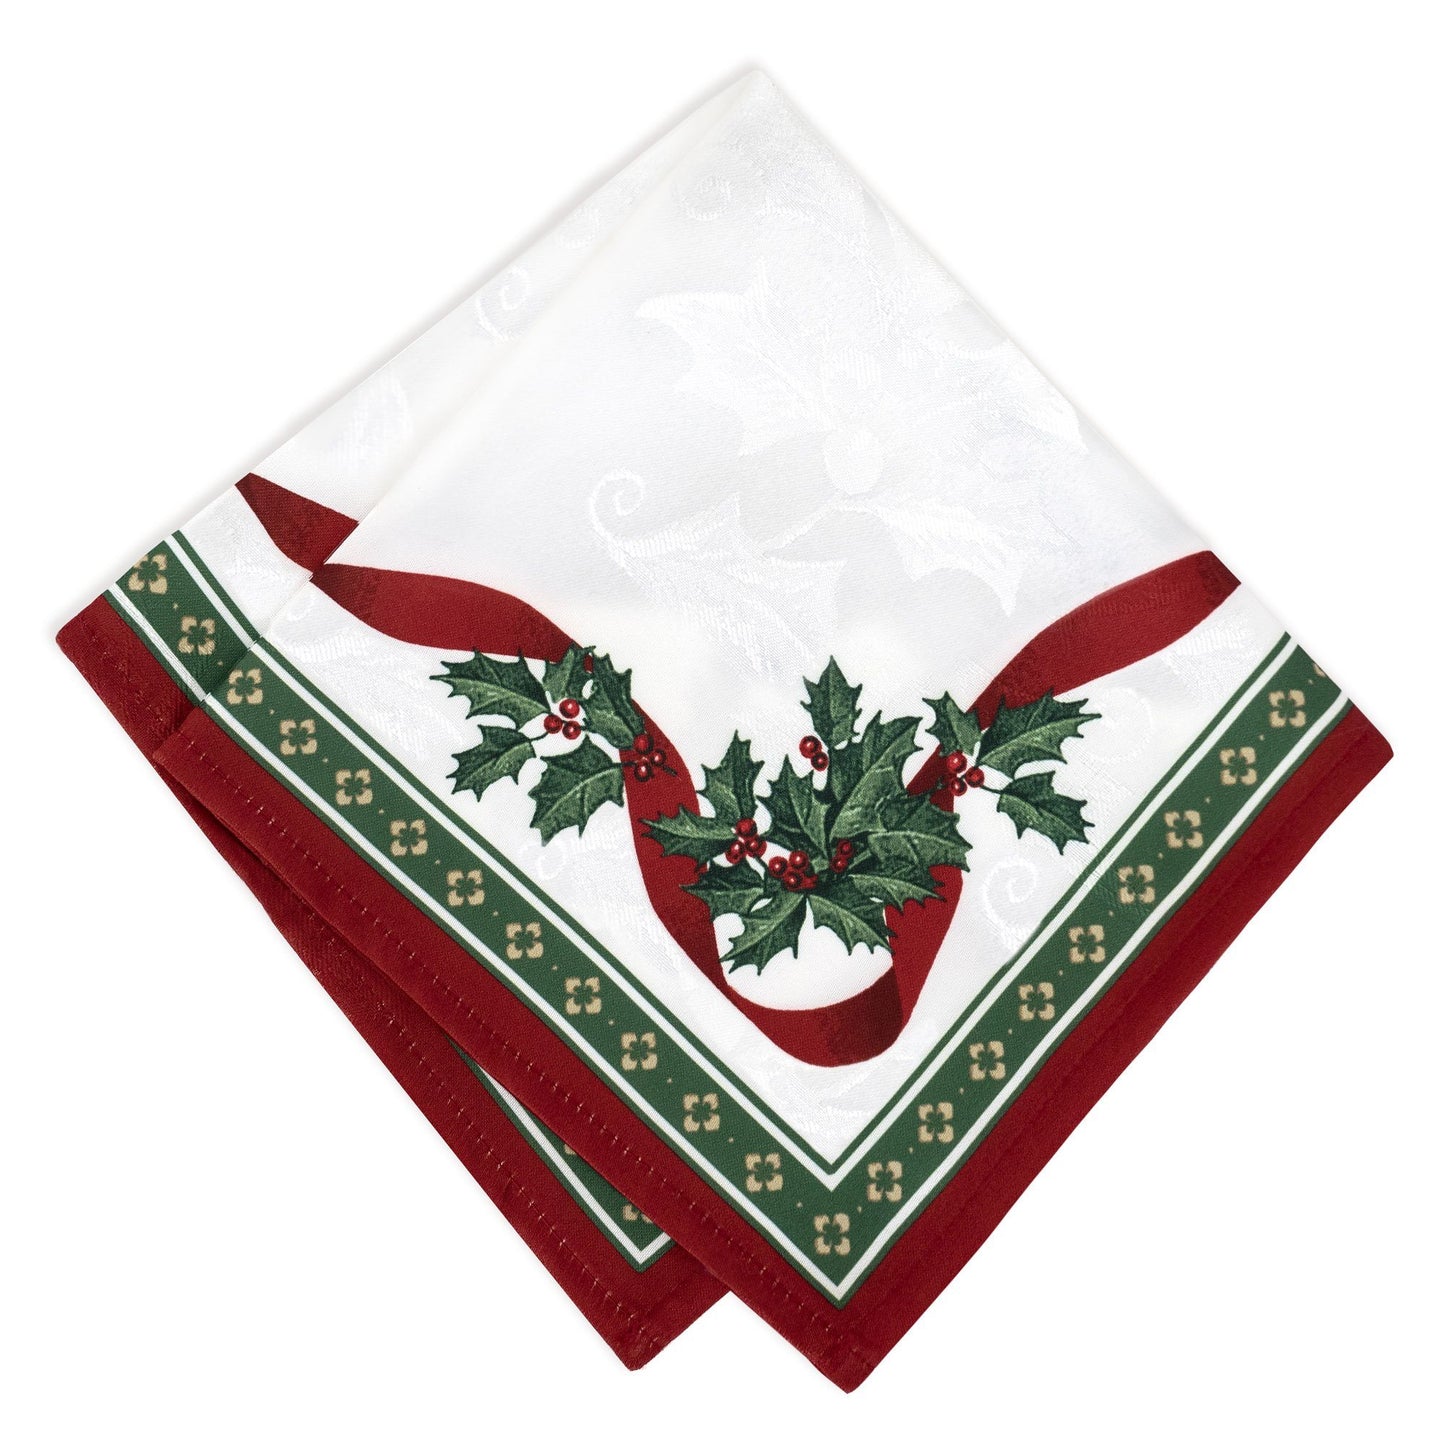 White holly damasks napkin set of 4 with red/green border and red ribbon design trim with holly sprigs